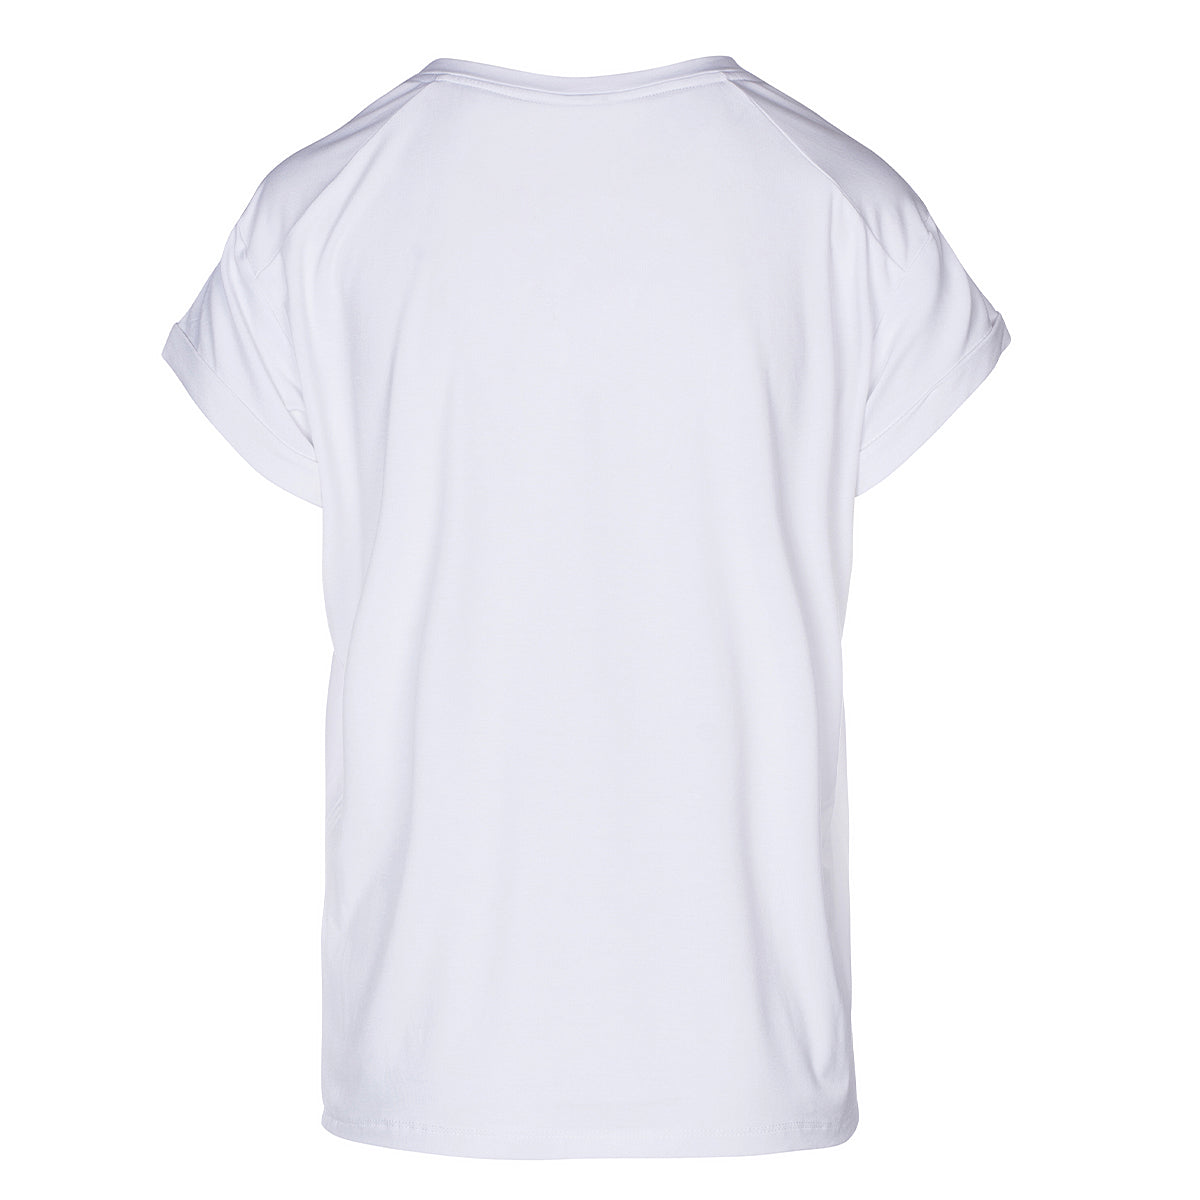 LUXZUZ // ONE TWO Karvi Bamboo T-Shirt 901 White